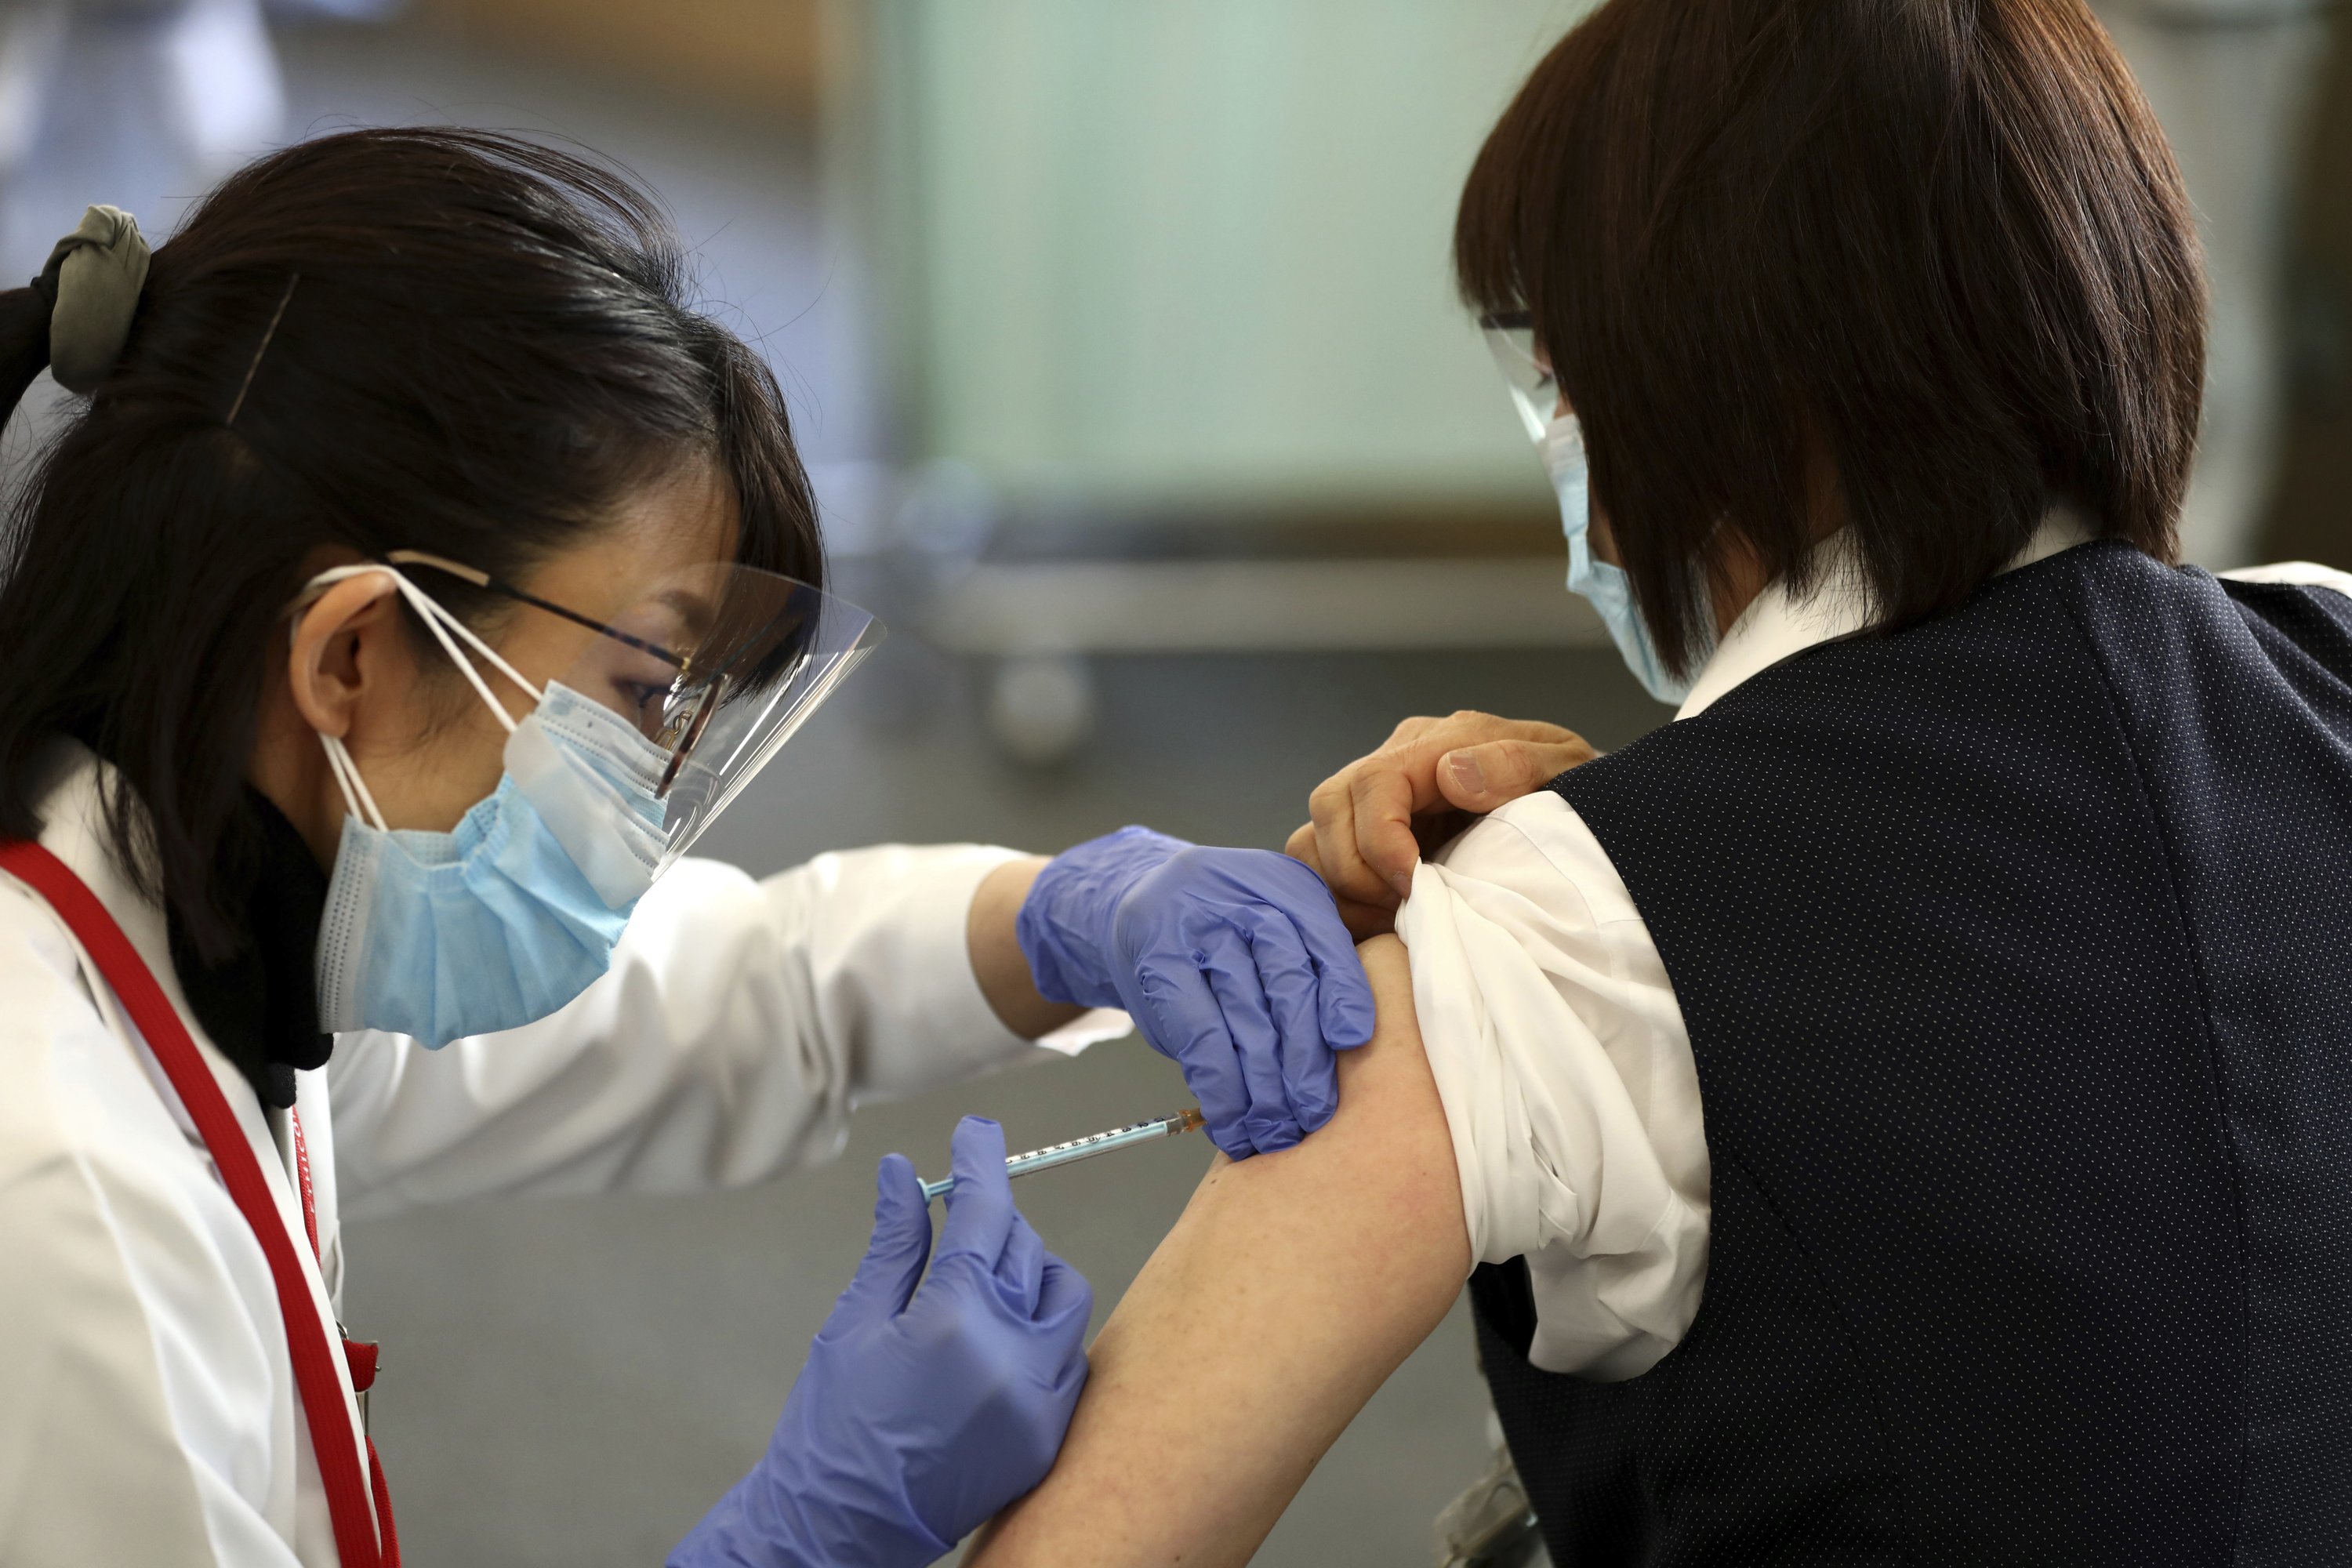 Japan starts COVID-19 vaccination with an eye on the Olympics